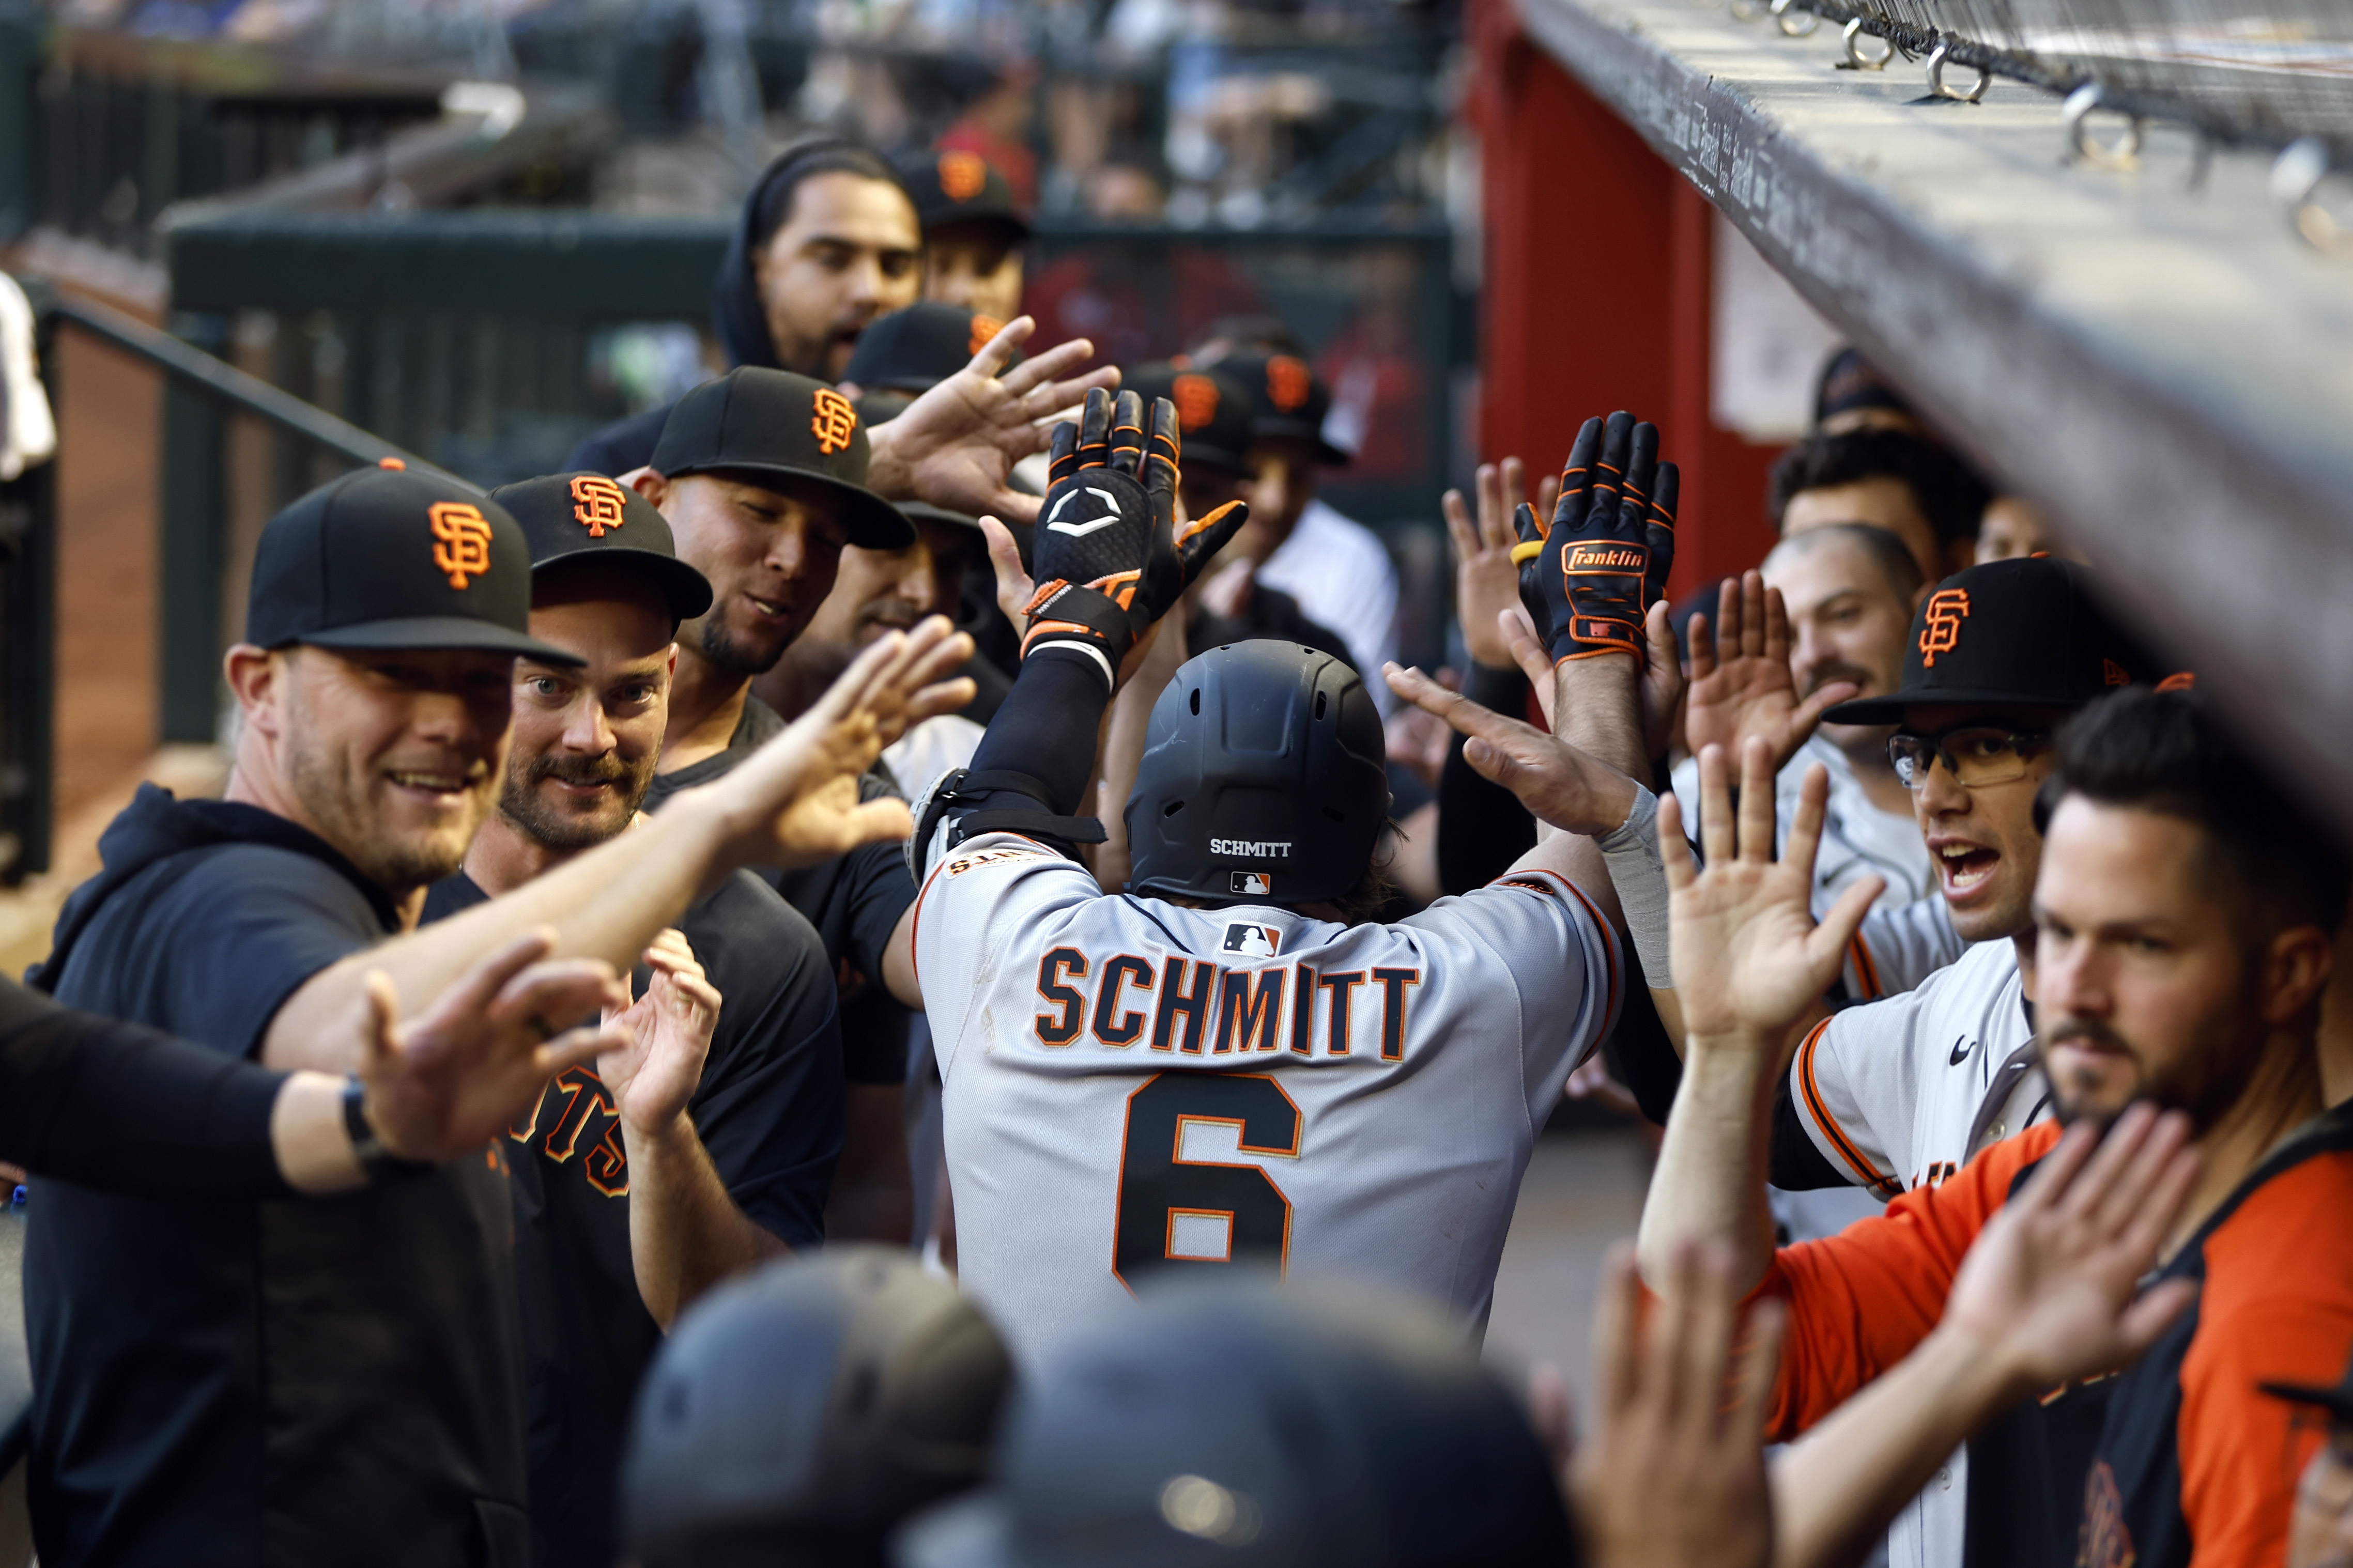 Photos: San Francisco Giants fans celebrate return to 'normalcy